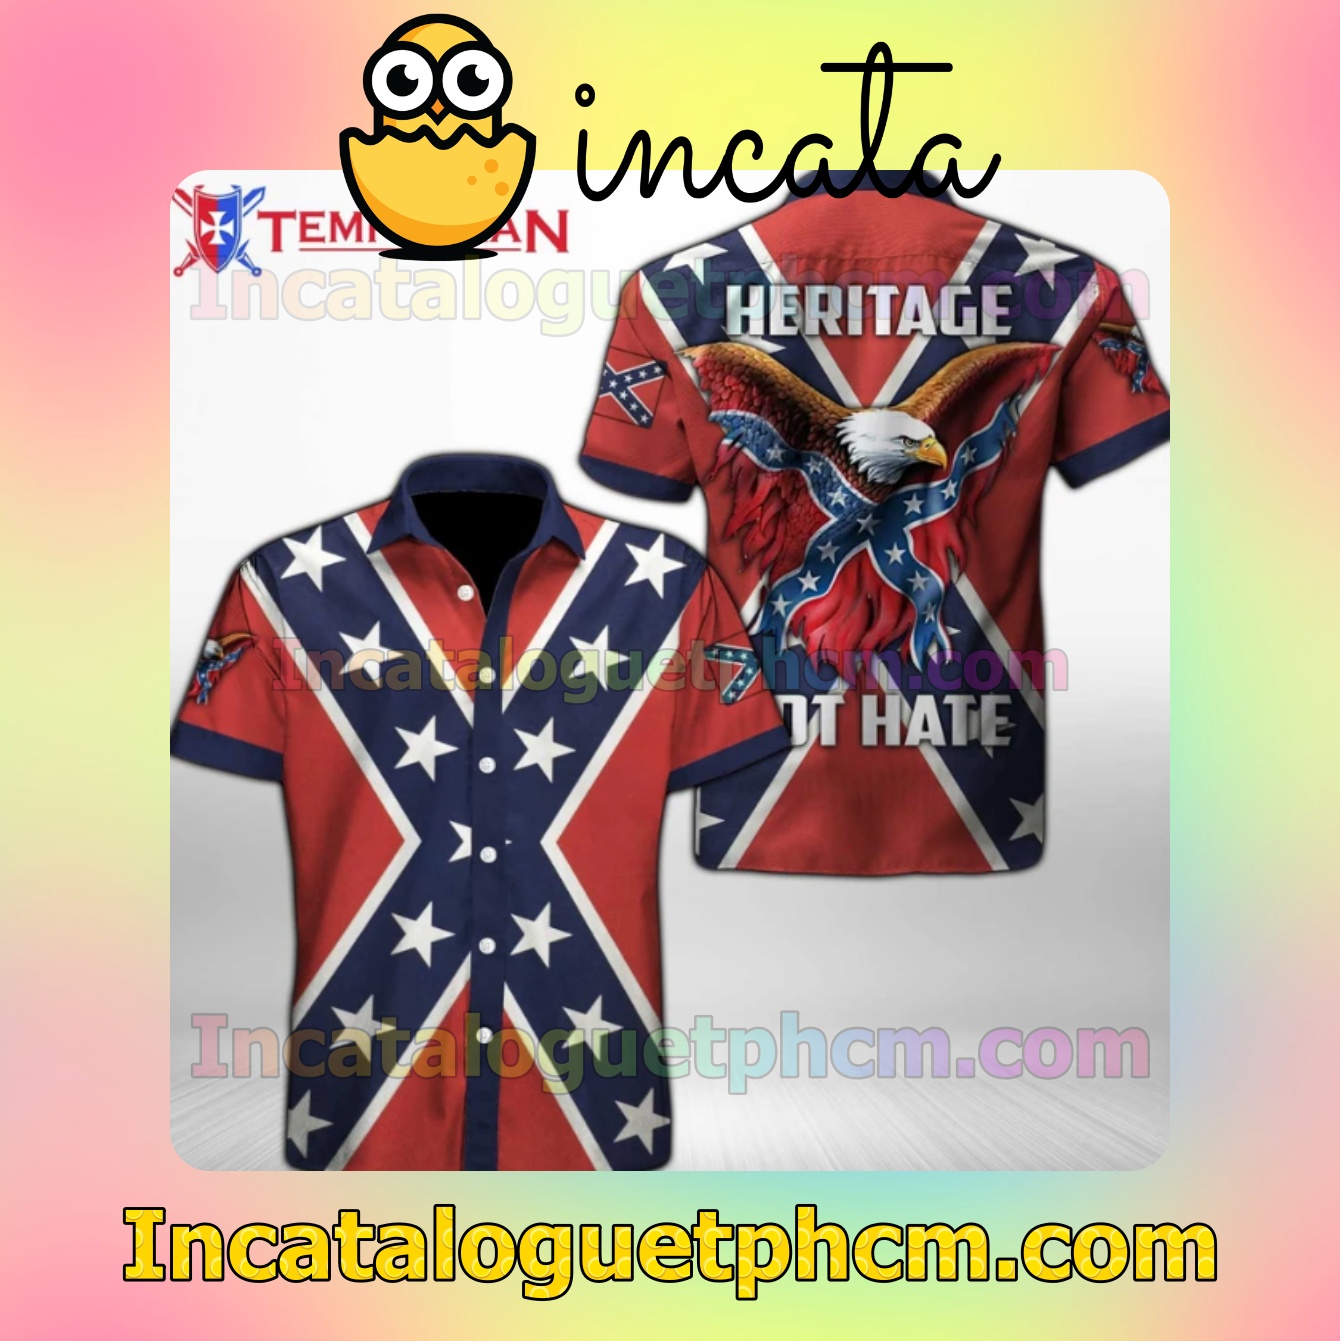 Eagle Heritage Not Hate Red Mens Short Sleeve Shirts